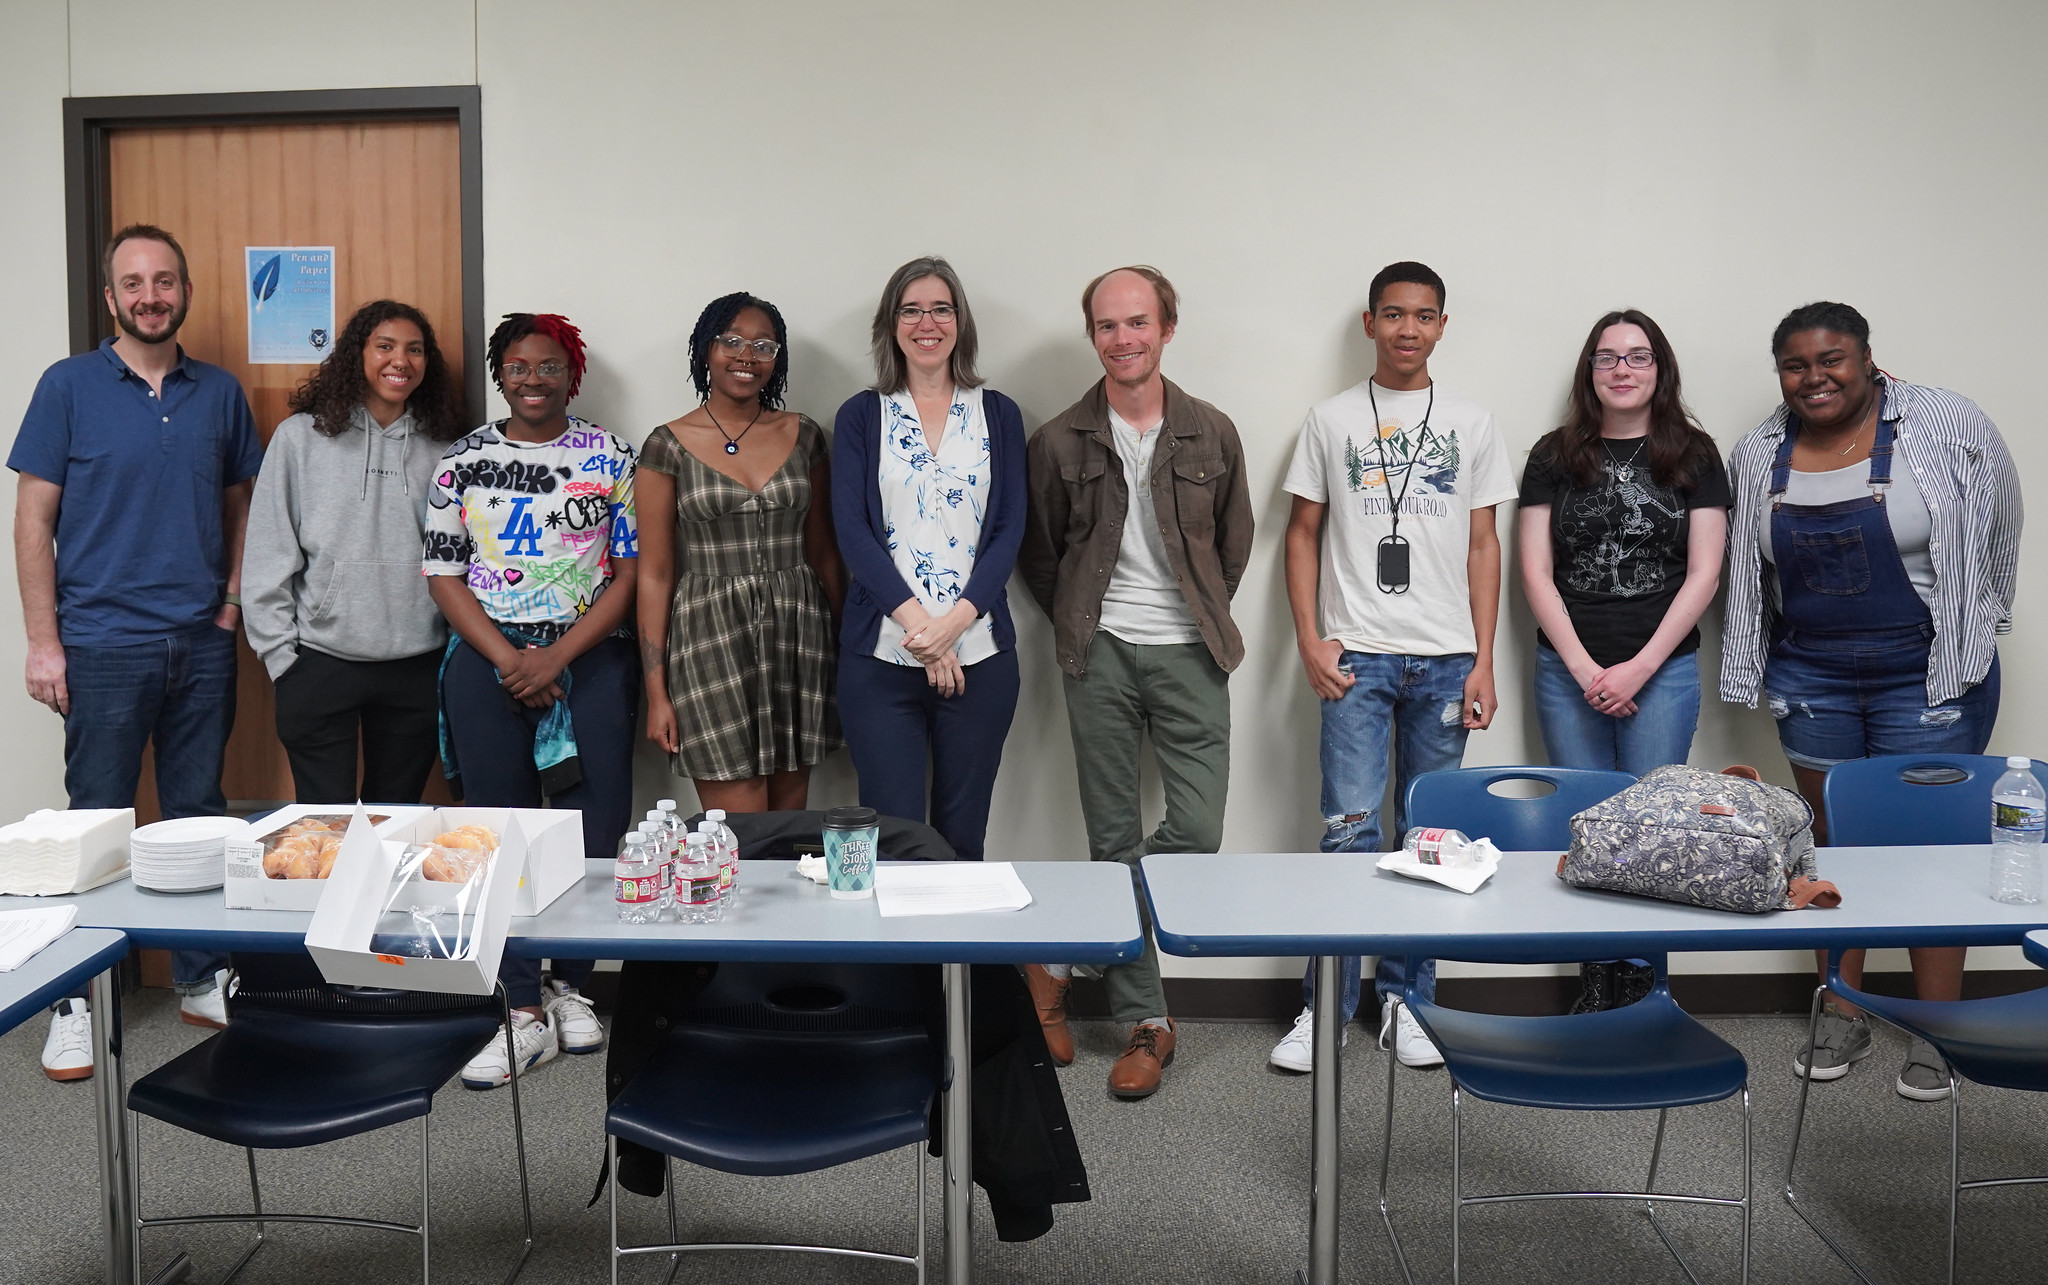 Lincoln University welcomed renowned poets Chelsea Rathburn and James Davis May for a captivating event on poetry. The Workshops & Conversation event was a two-part affair that included the poets sharing their favorite pieces, discussing literary elements, and delving into the art of revision.